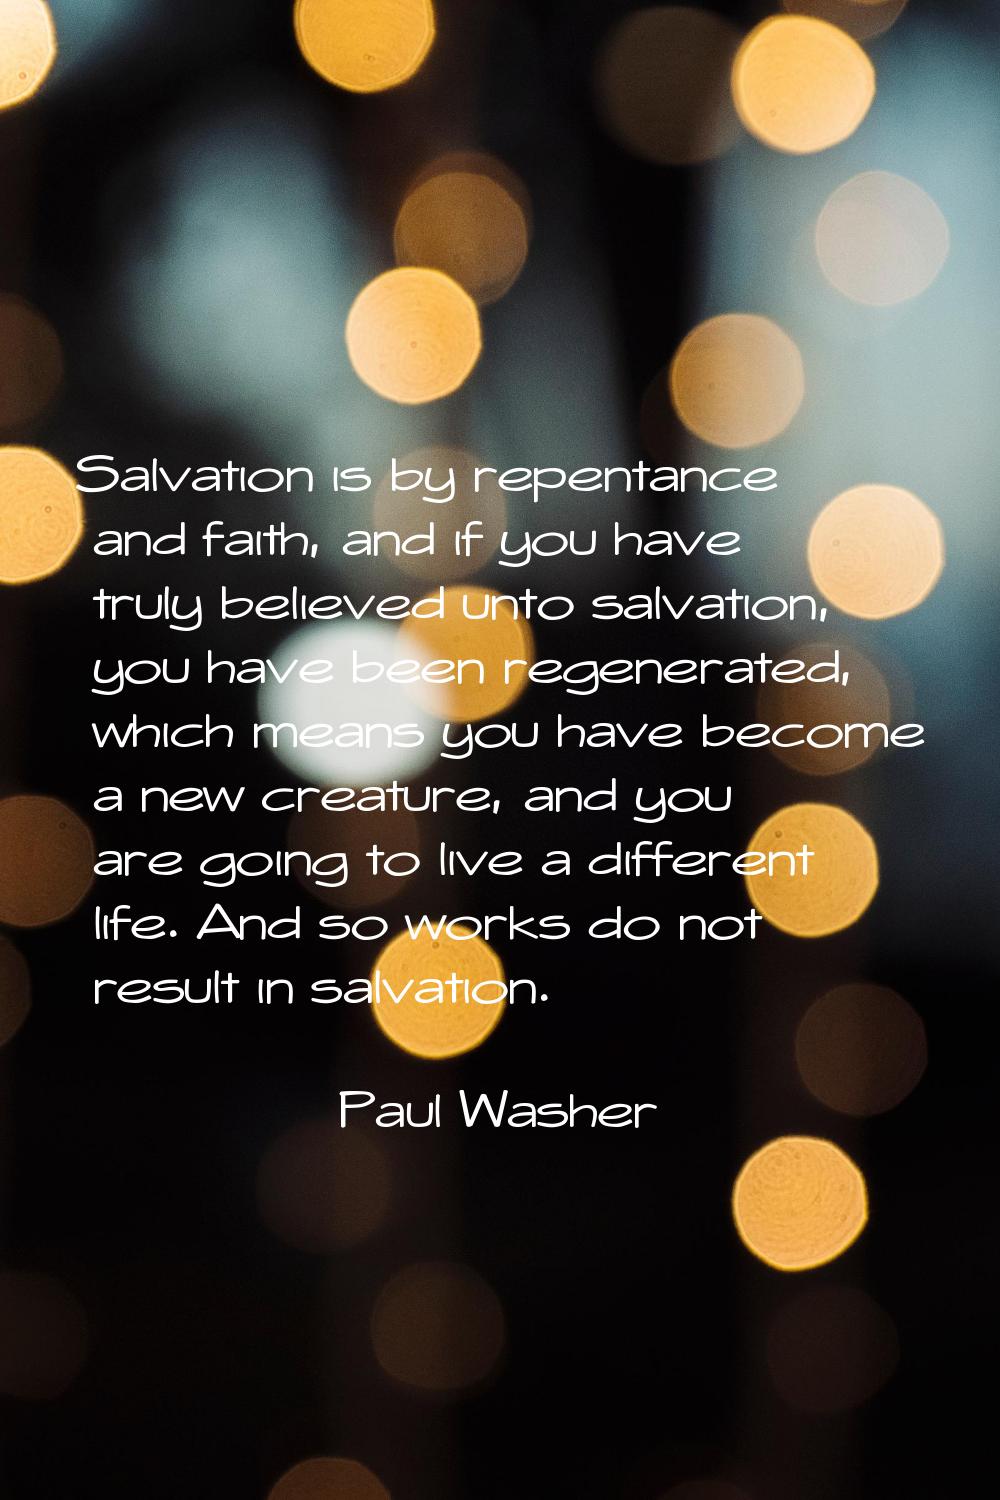 Salvation is by repentance and faith, and if you have truly believed unto salvation, you have been 